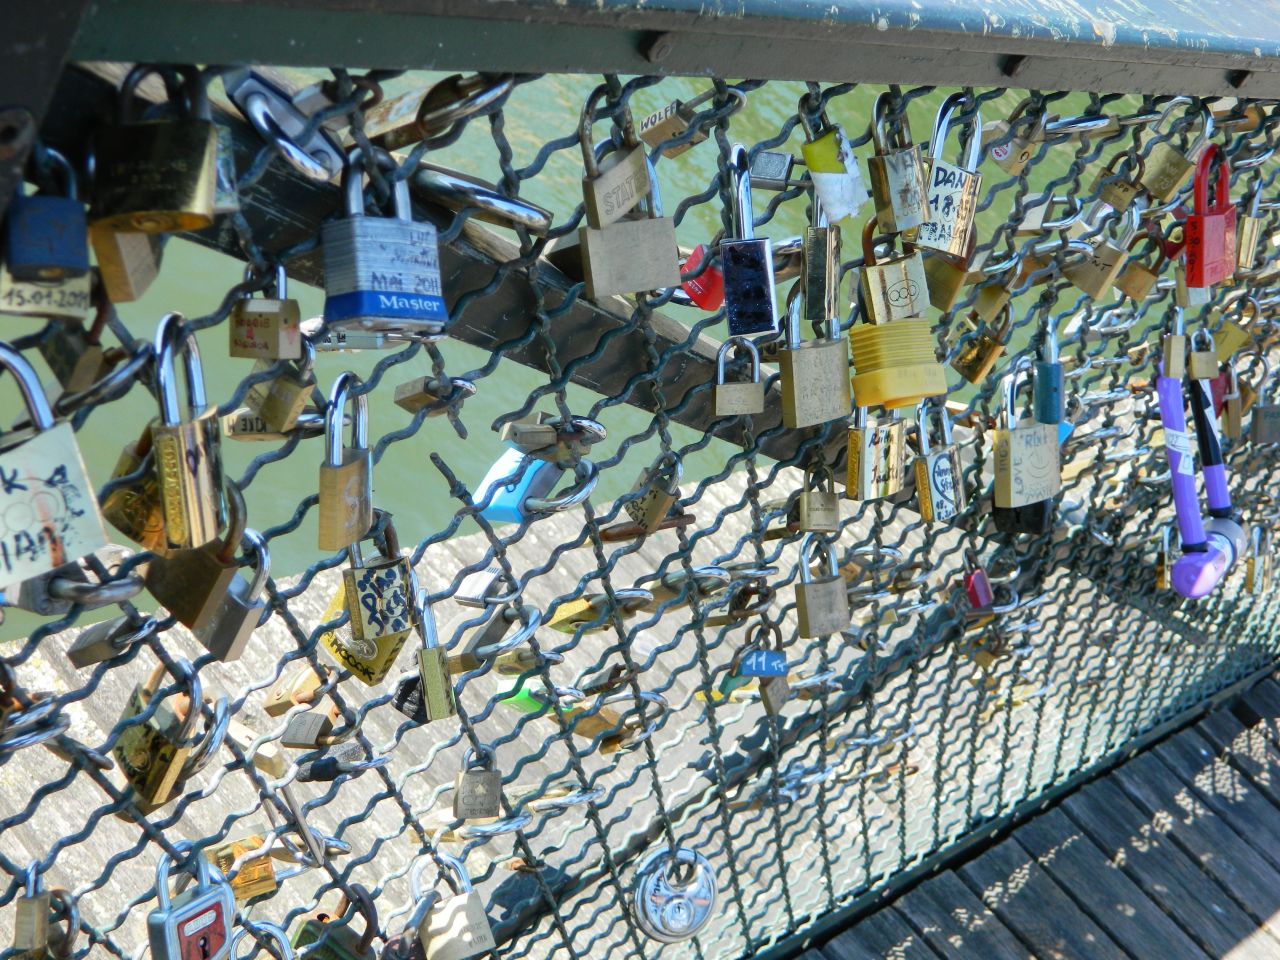 Allie Roberts took this photo of the "love locks" on the Pont de l'Archevêché, known as the Archbishop's Bridge. "Couples write their names on padlocks, lock them to a bridge over the river, and throw the key in the river, signifying that their love will last forever."